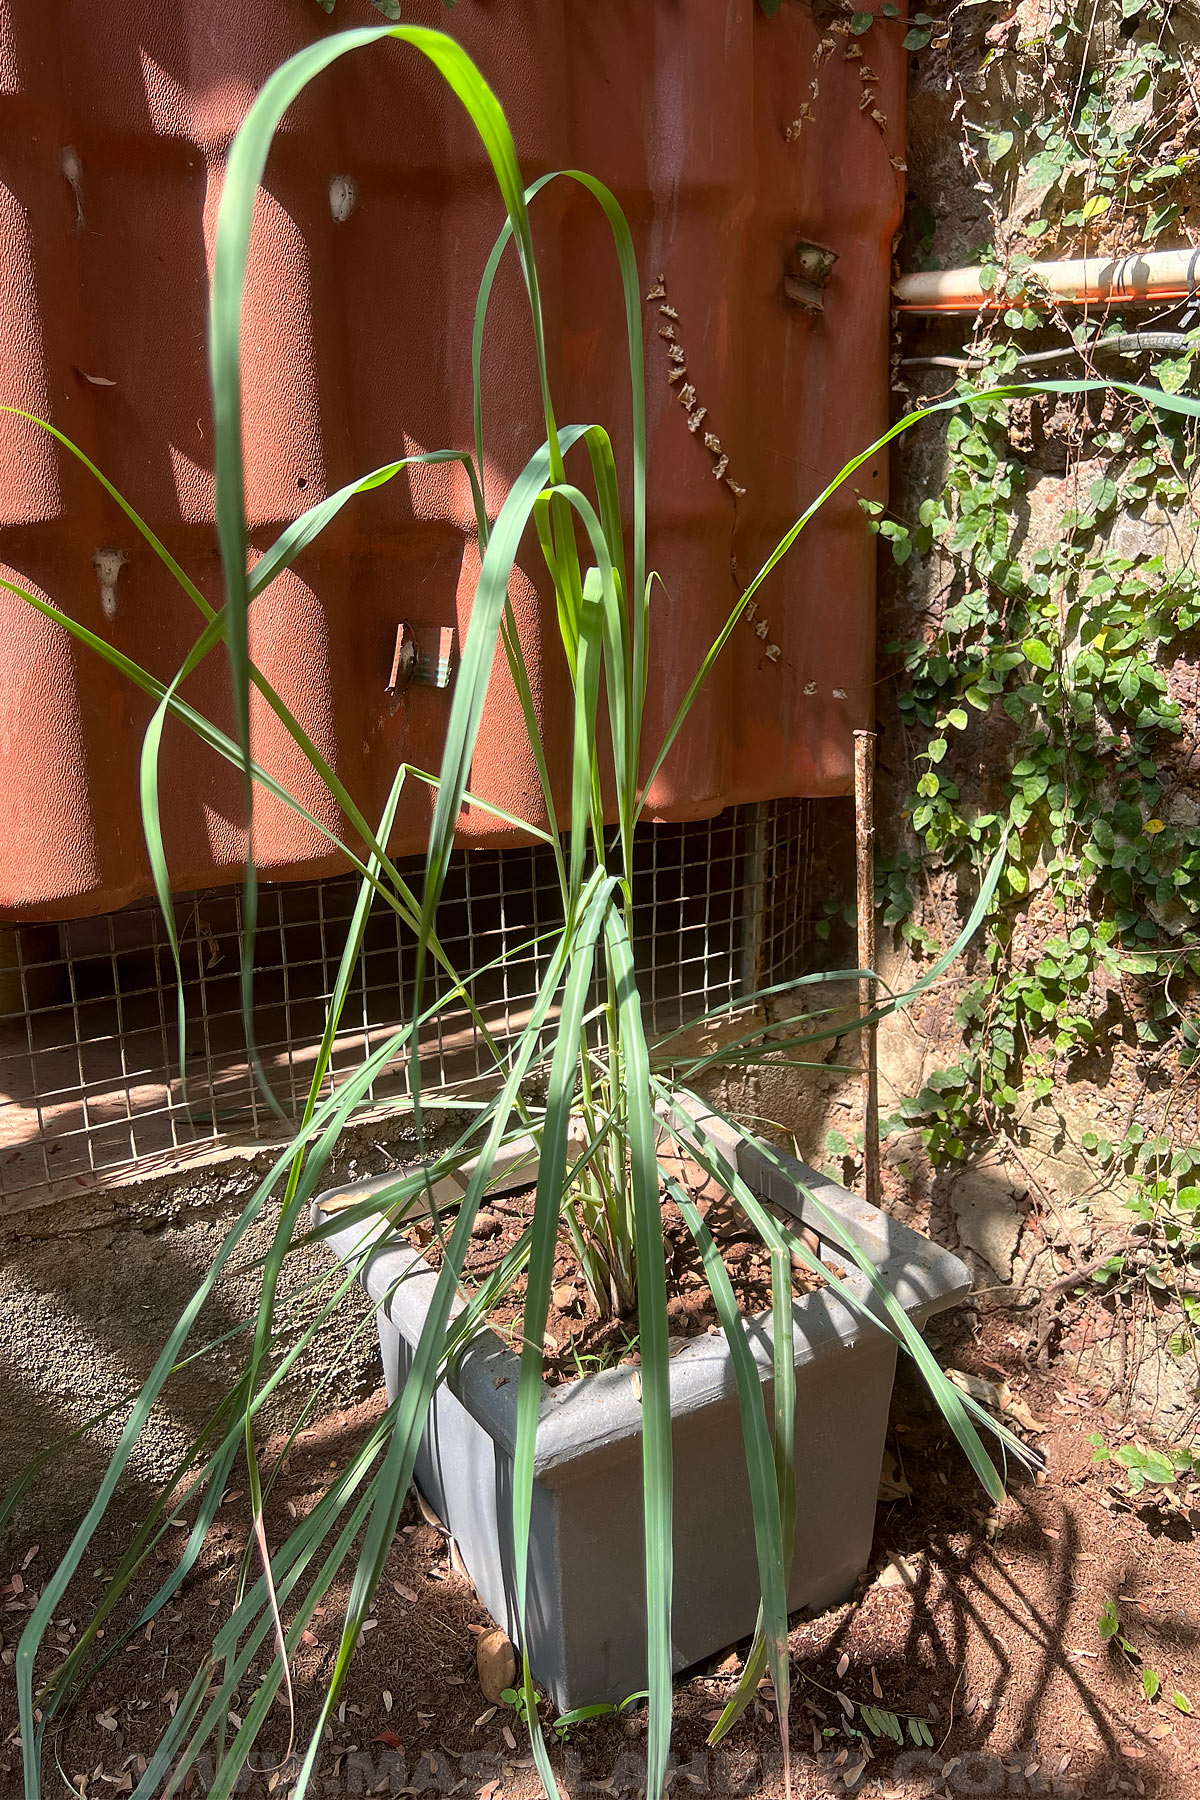 Lemongrass growing in a pot in March 2023 in Goa, India. We keep it behind a fence so that cats and dogs don't chew it away.